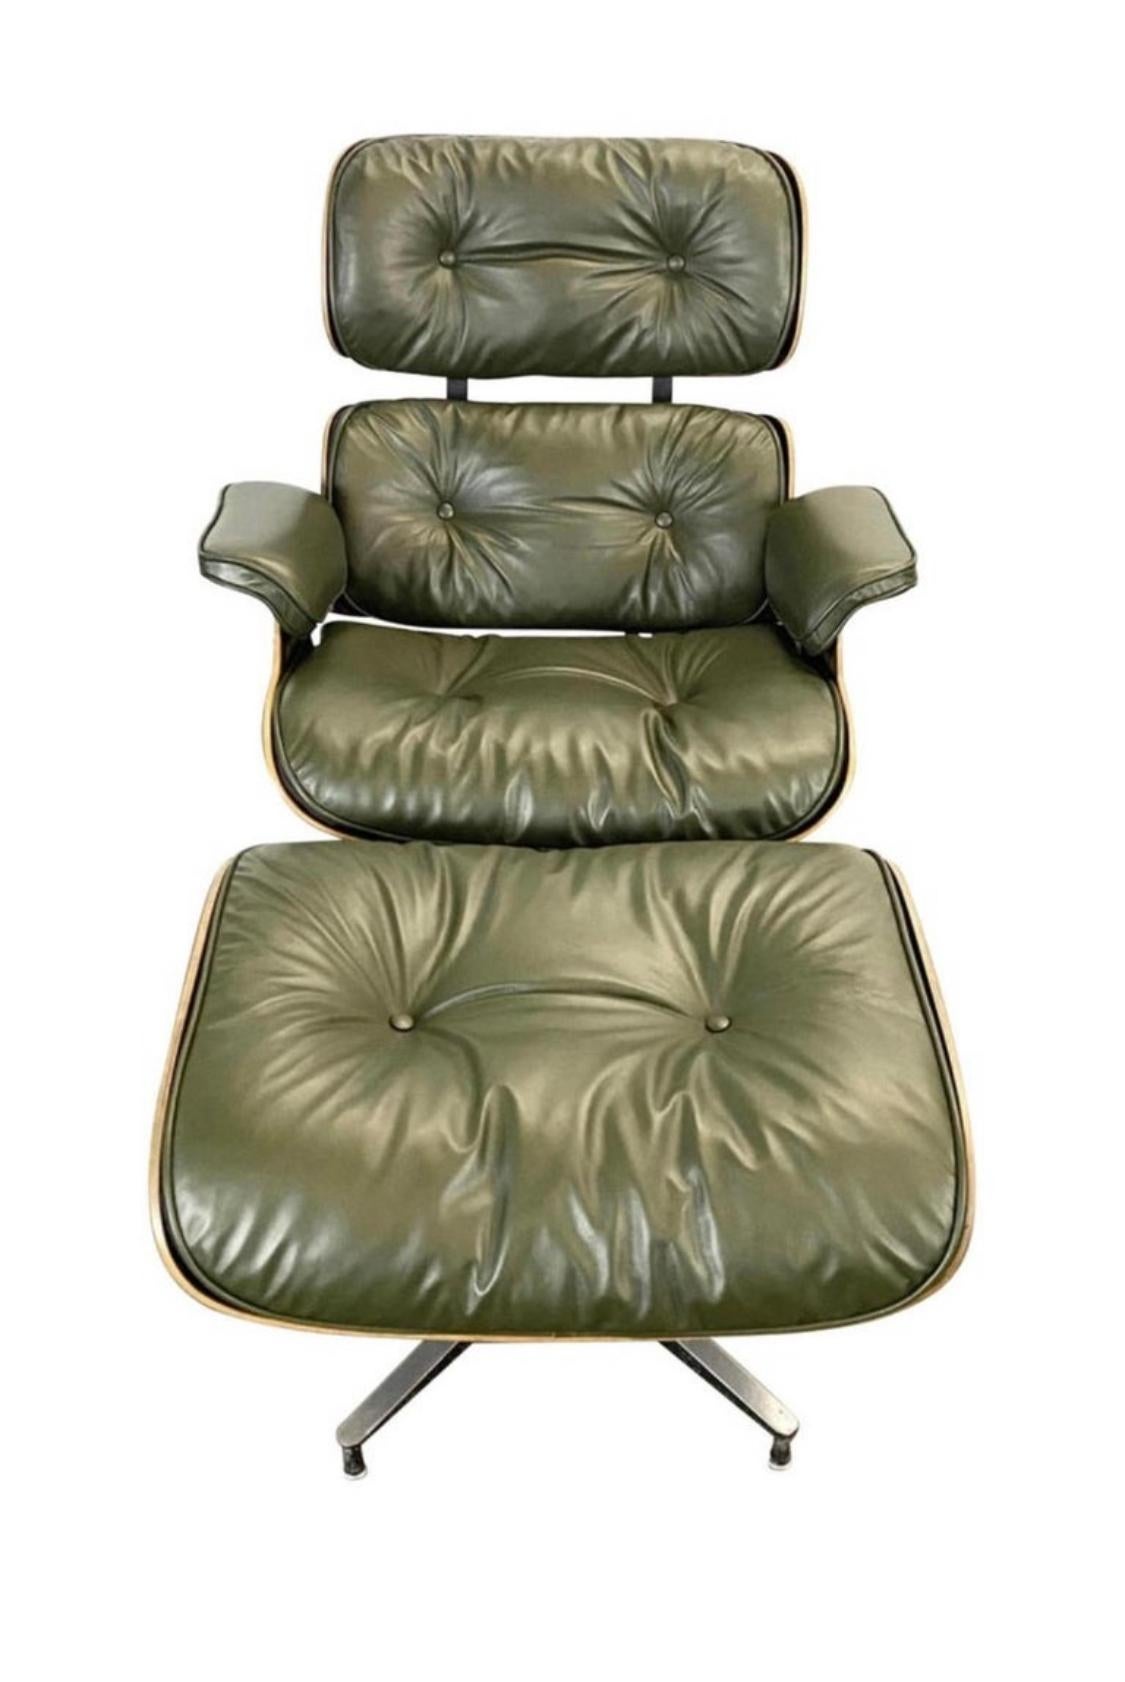 Not a color you see often! A classic Eames lounge chair and ottoman with vintage wood and metal components outfitted in brand new leather cushions in Avocado shade. 3-4 week production time. Signed and guaranteed authentic Herman see Miller Eames